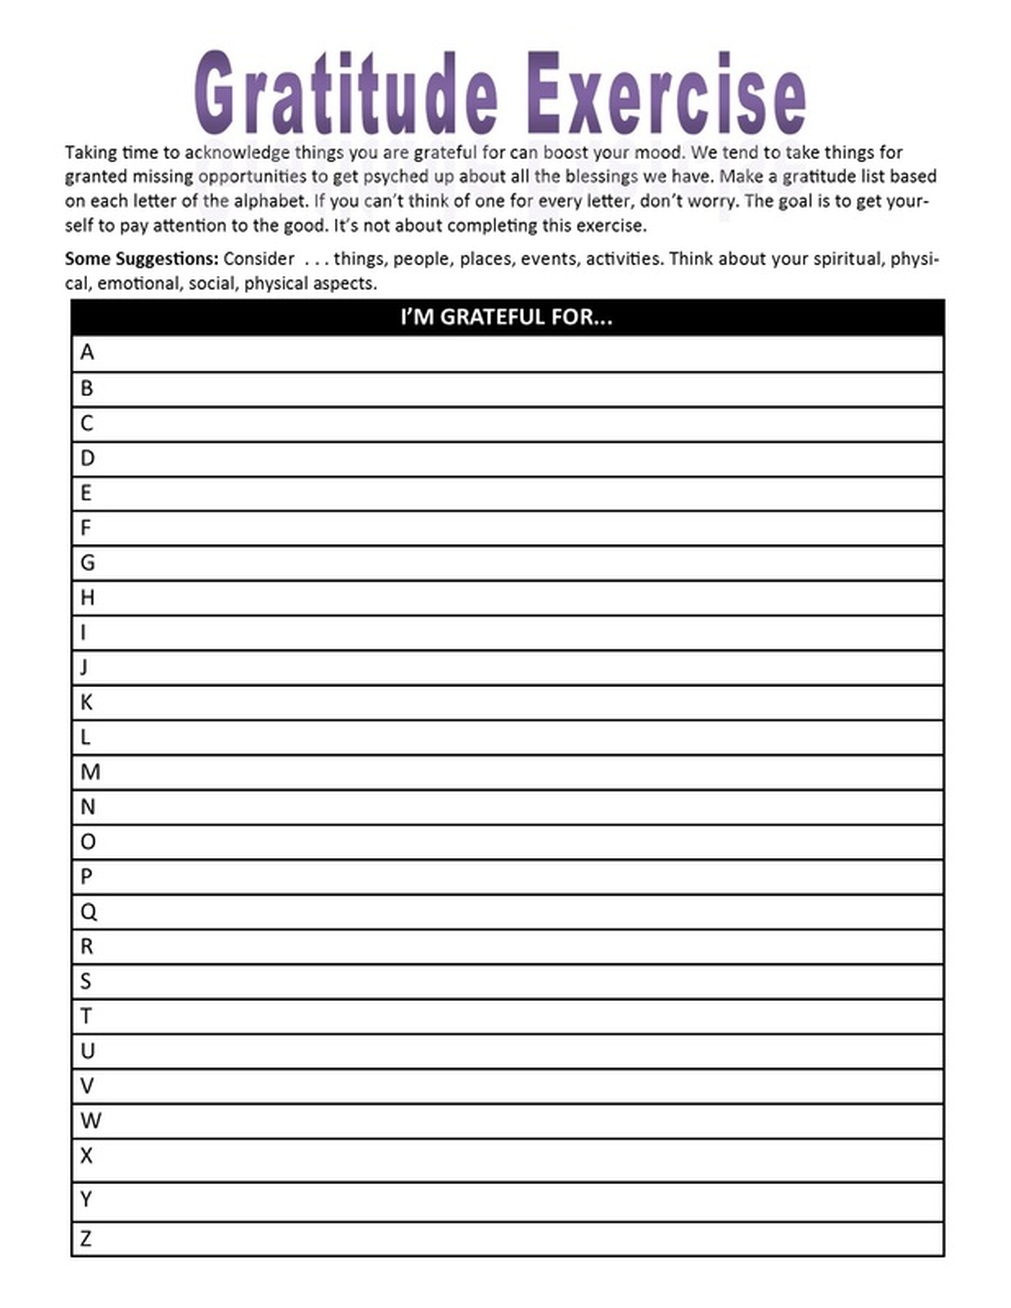 recovery-worksheets-for-addiction